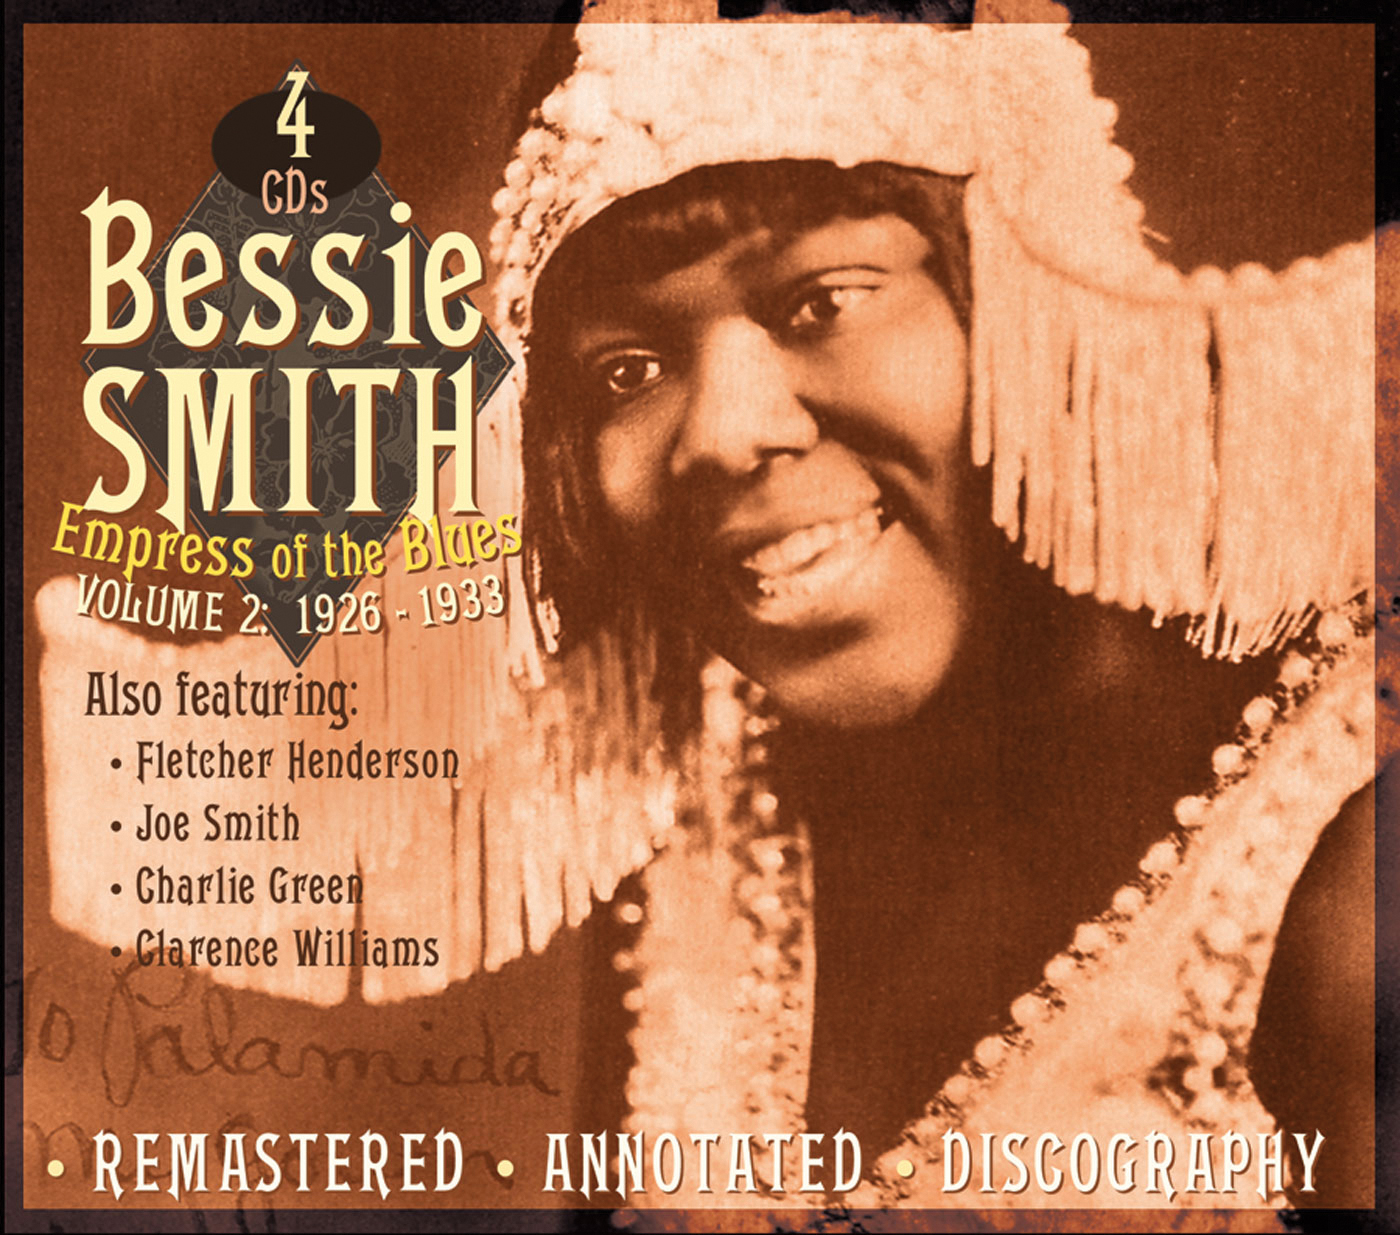 Bessie Smith Queen Of The Blues Vol 2 The Later Years 1926 1933 Mvd Entertainment Group B2b